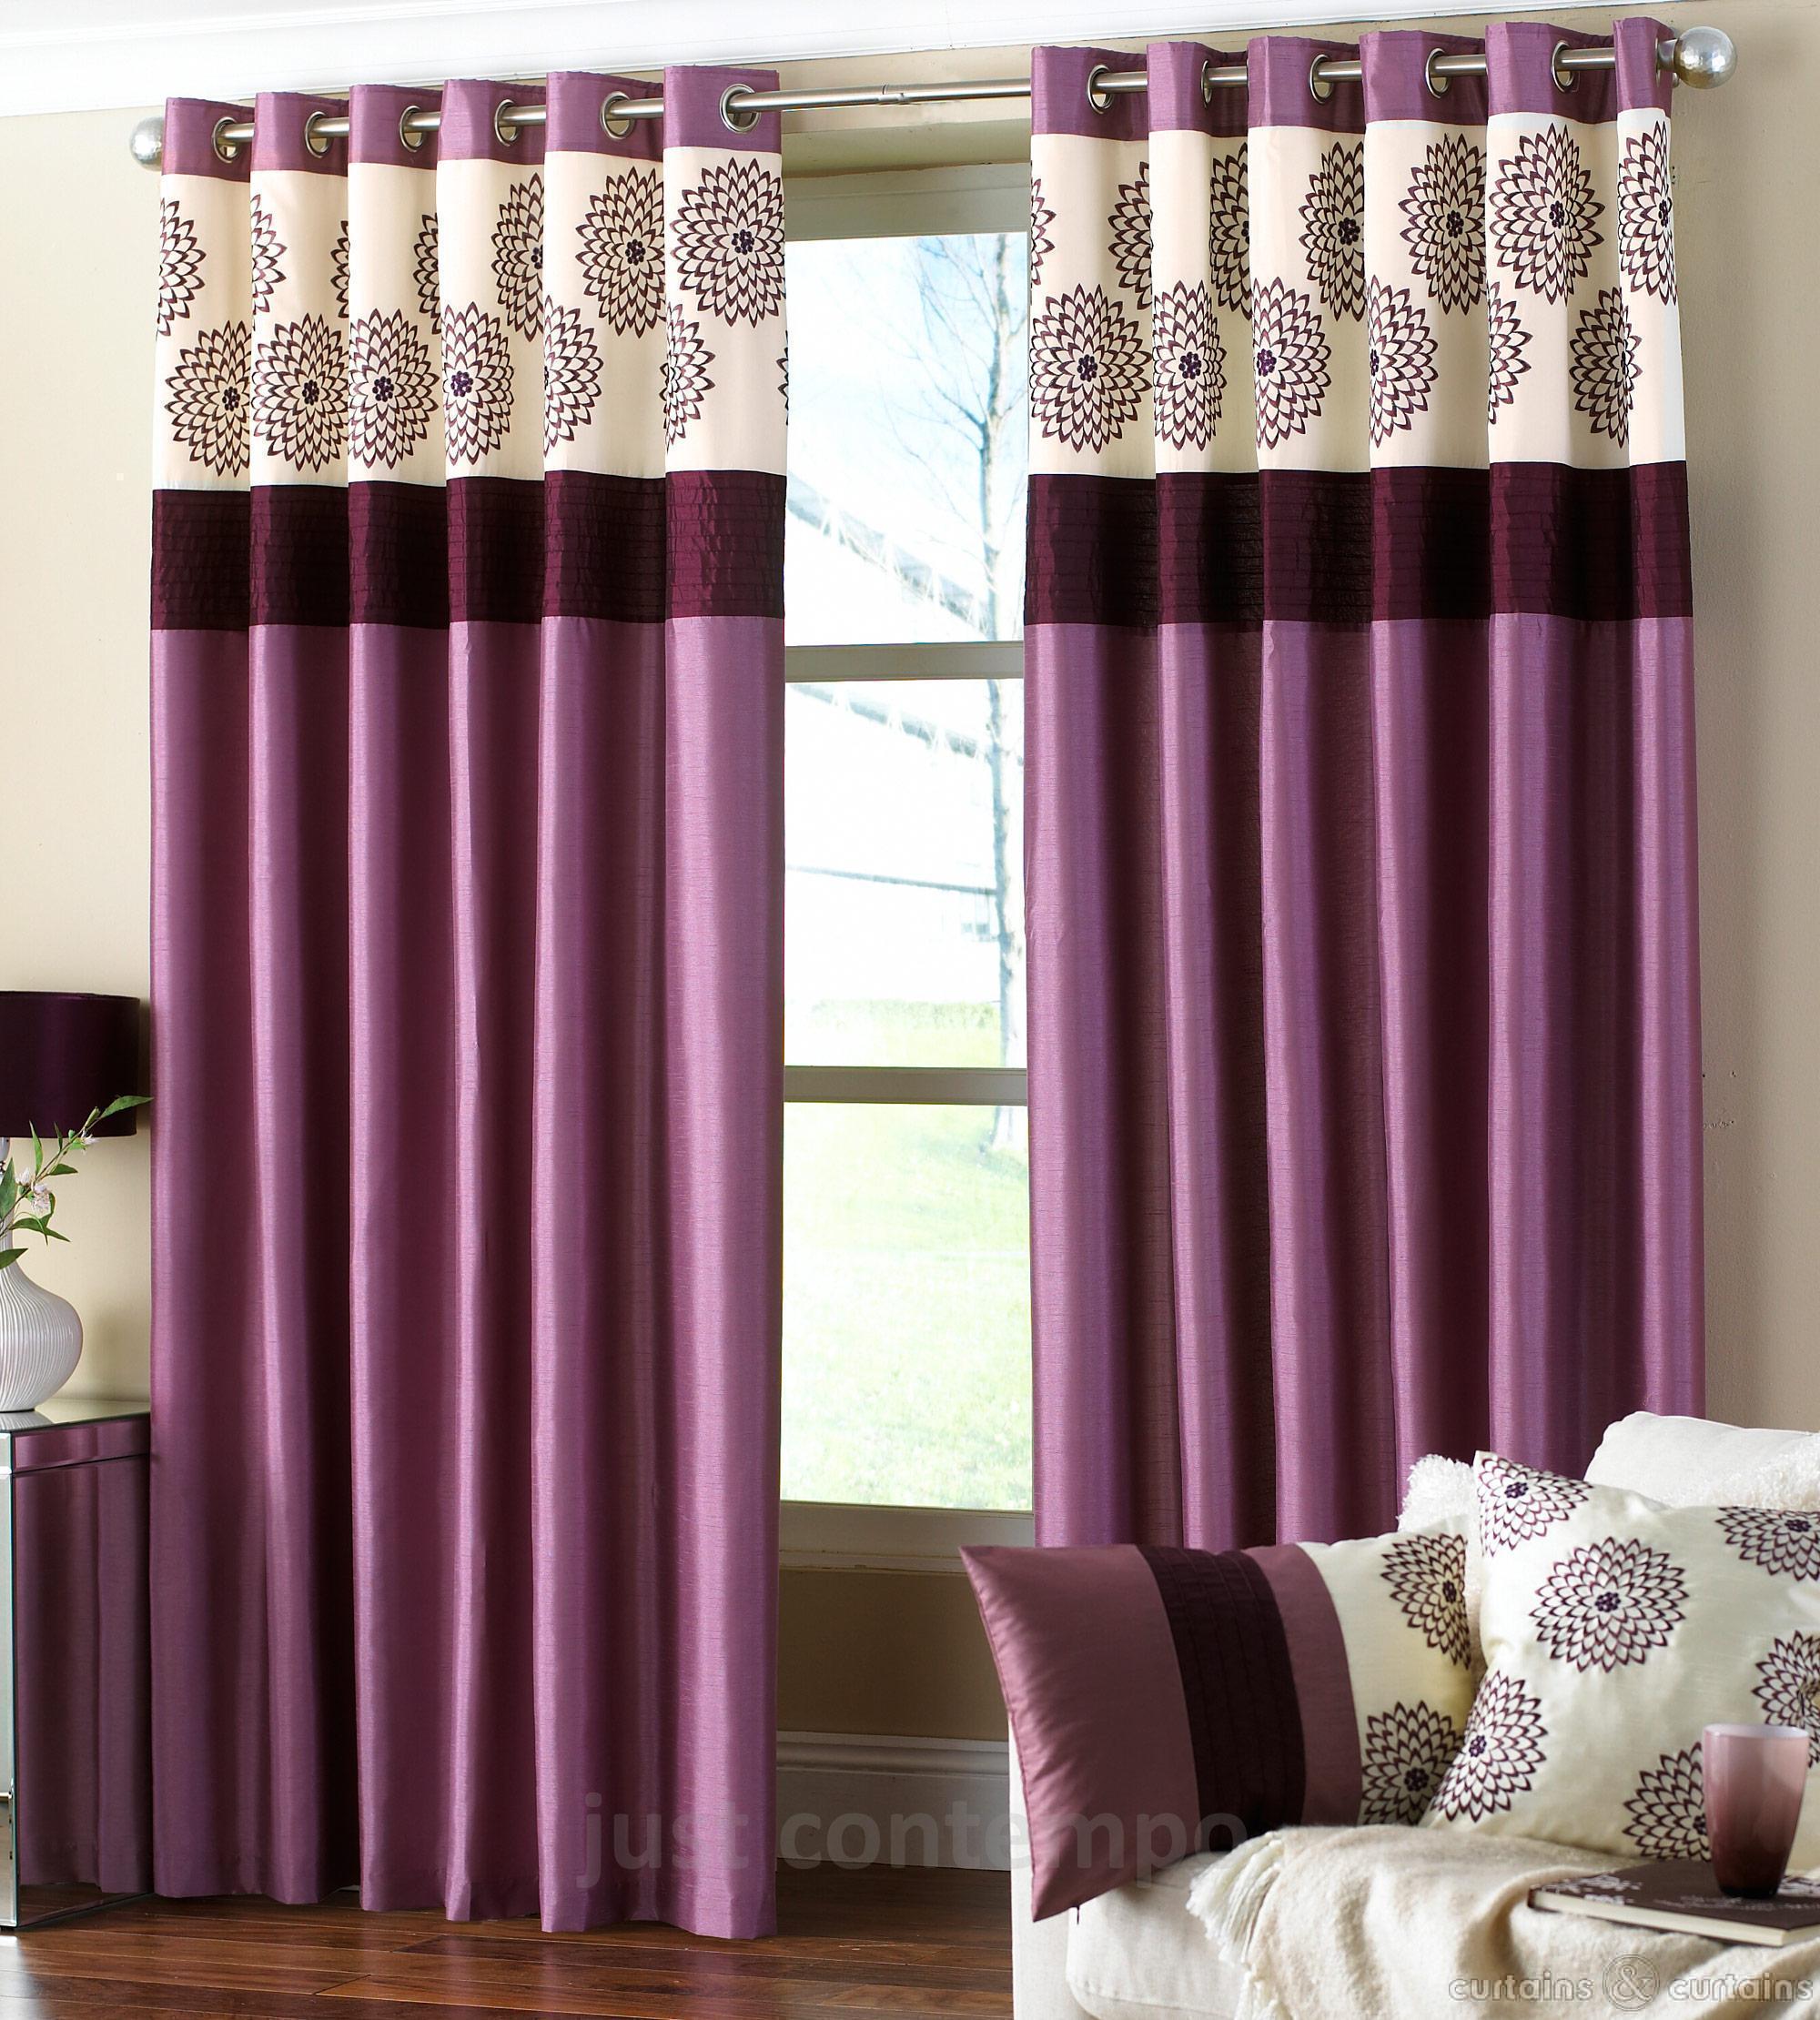 Choosing Curtain Designs? Think of These 4 Aspects 